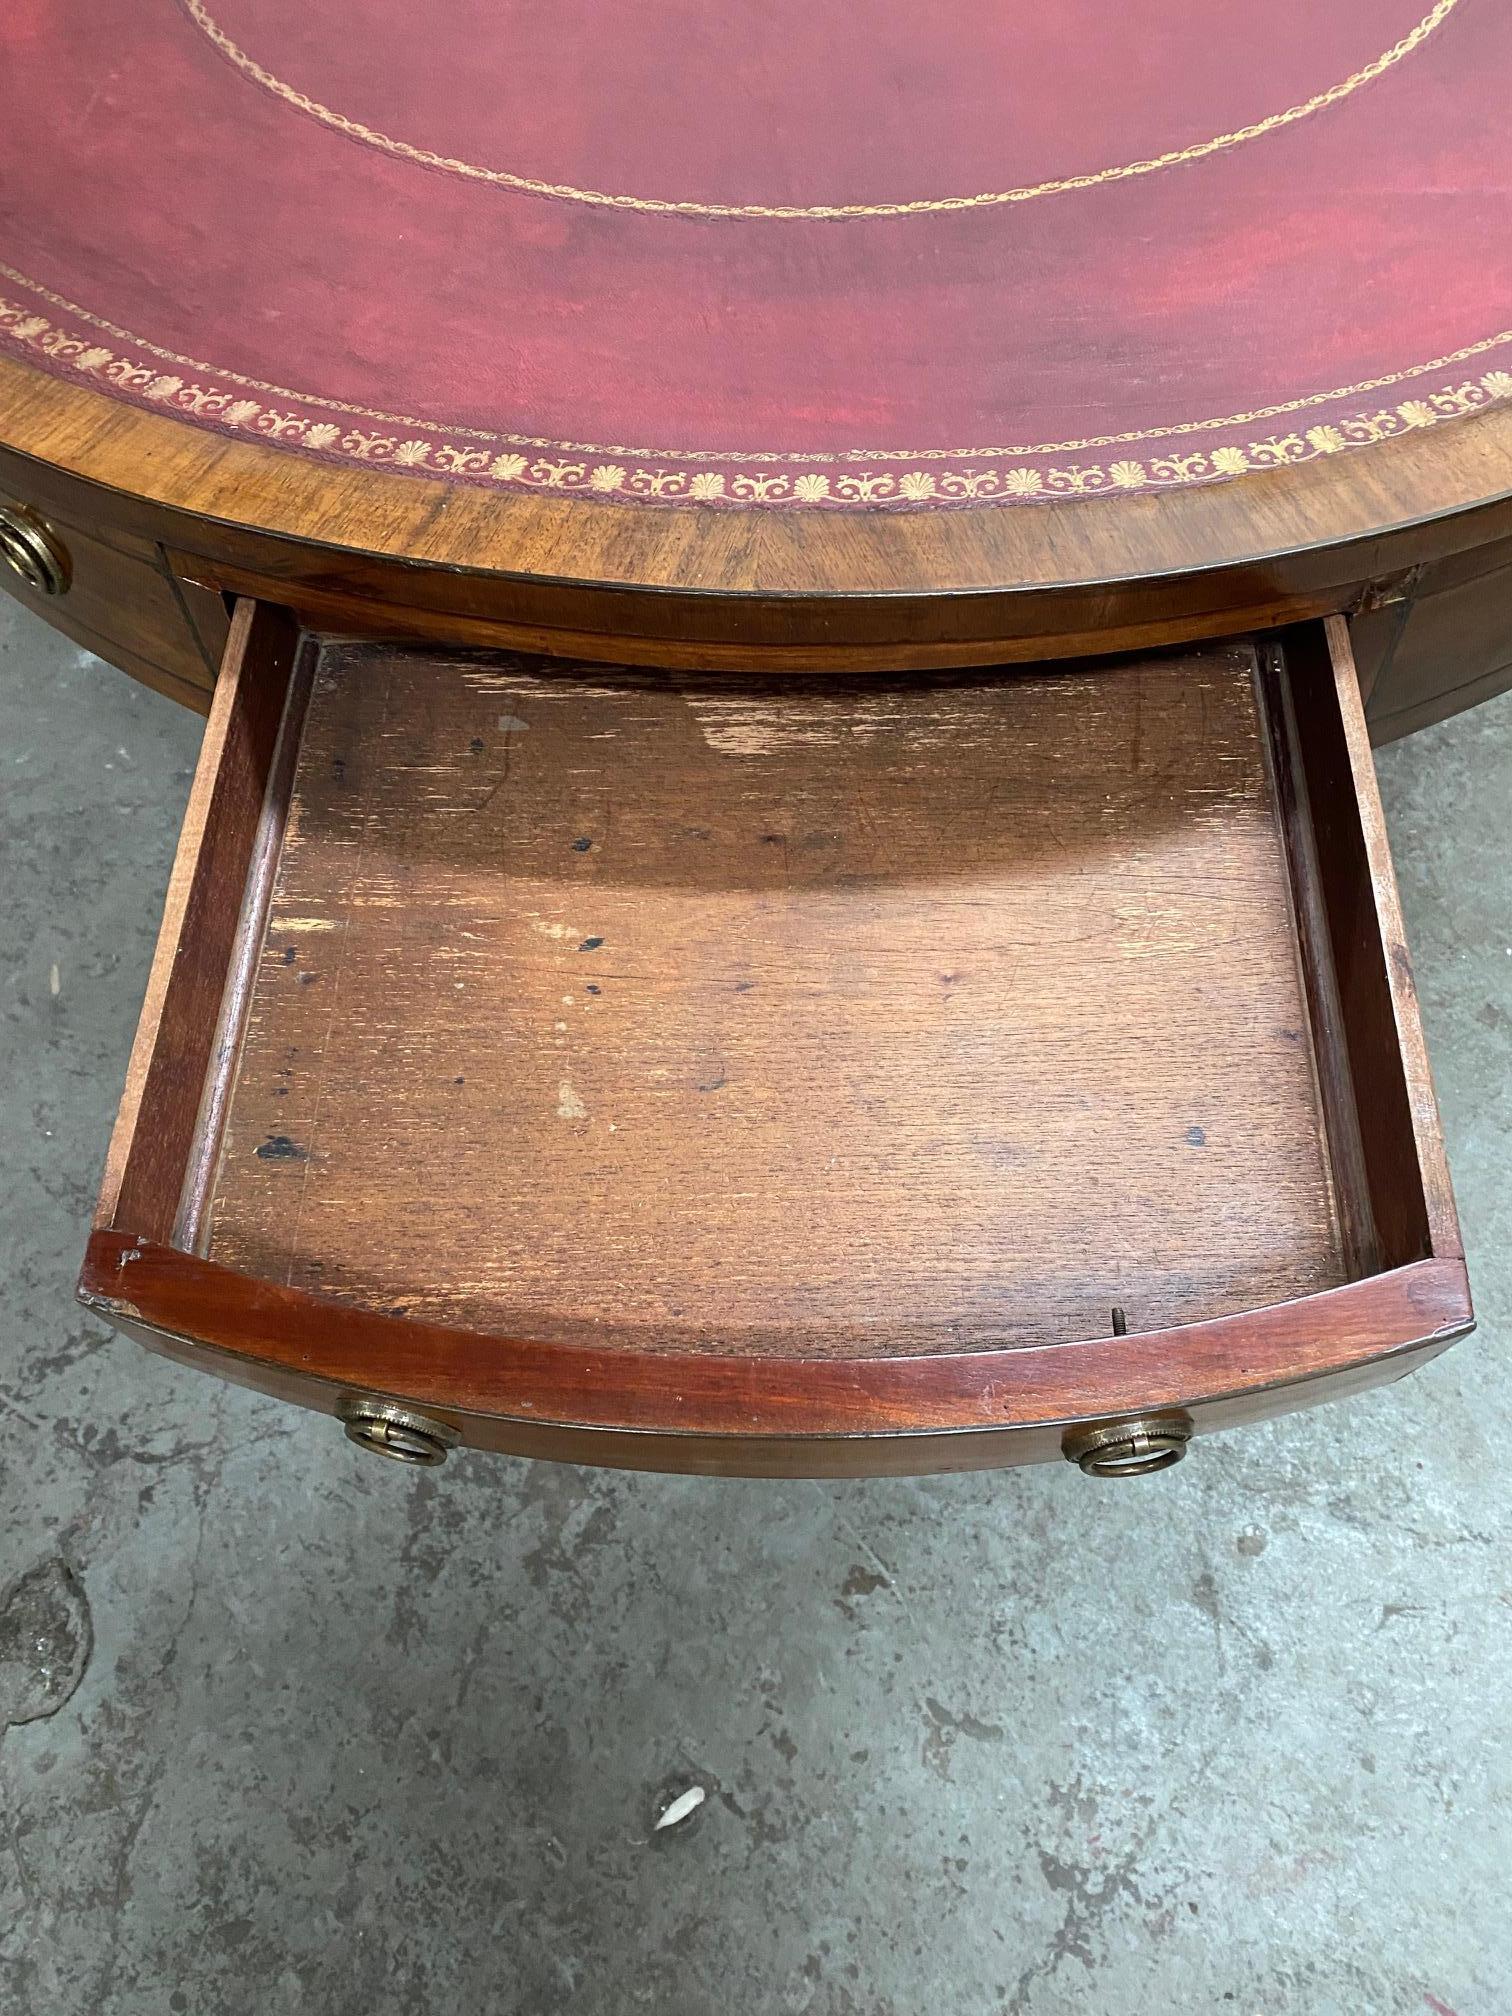 English mahogany drum table inset with red gilt tooled leather resting on tripod base.
 